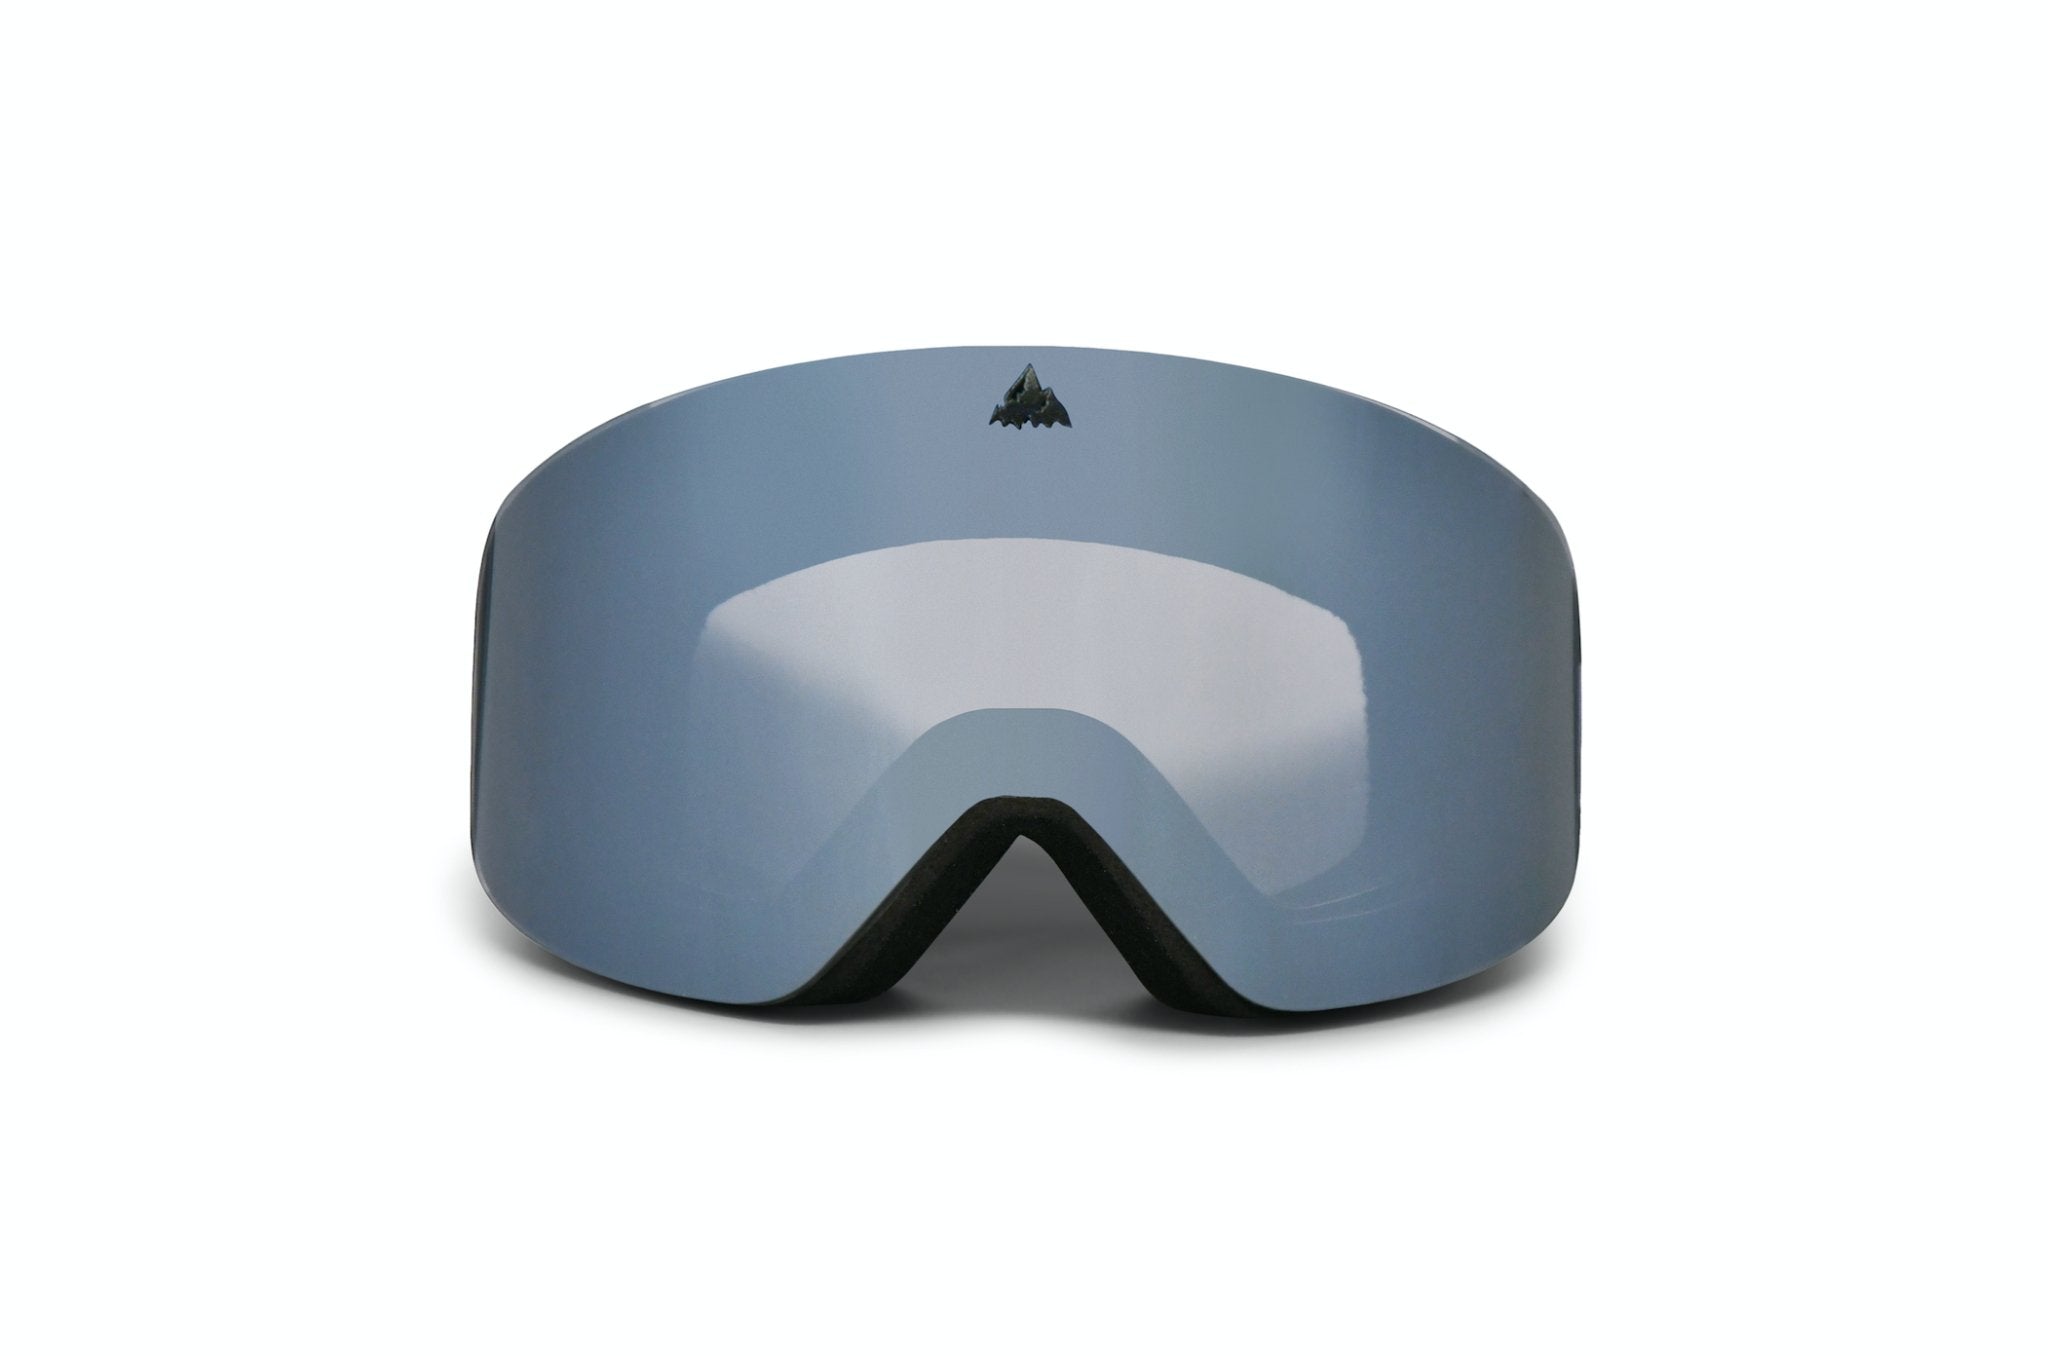 Higher Cylindrical Goggles - Classic Edition - Teton Gravity Research